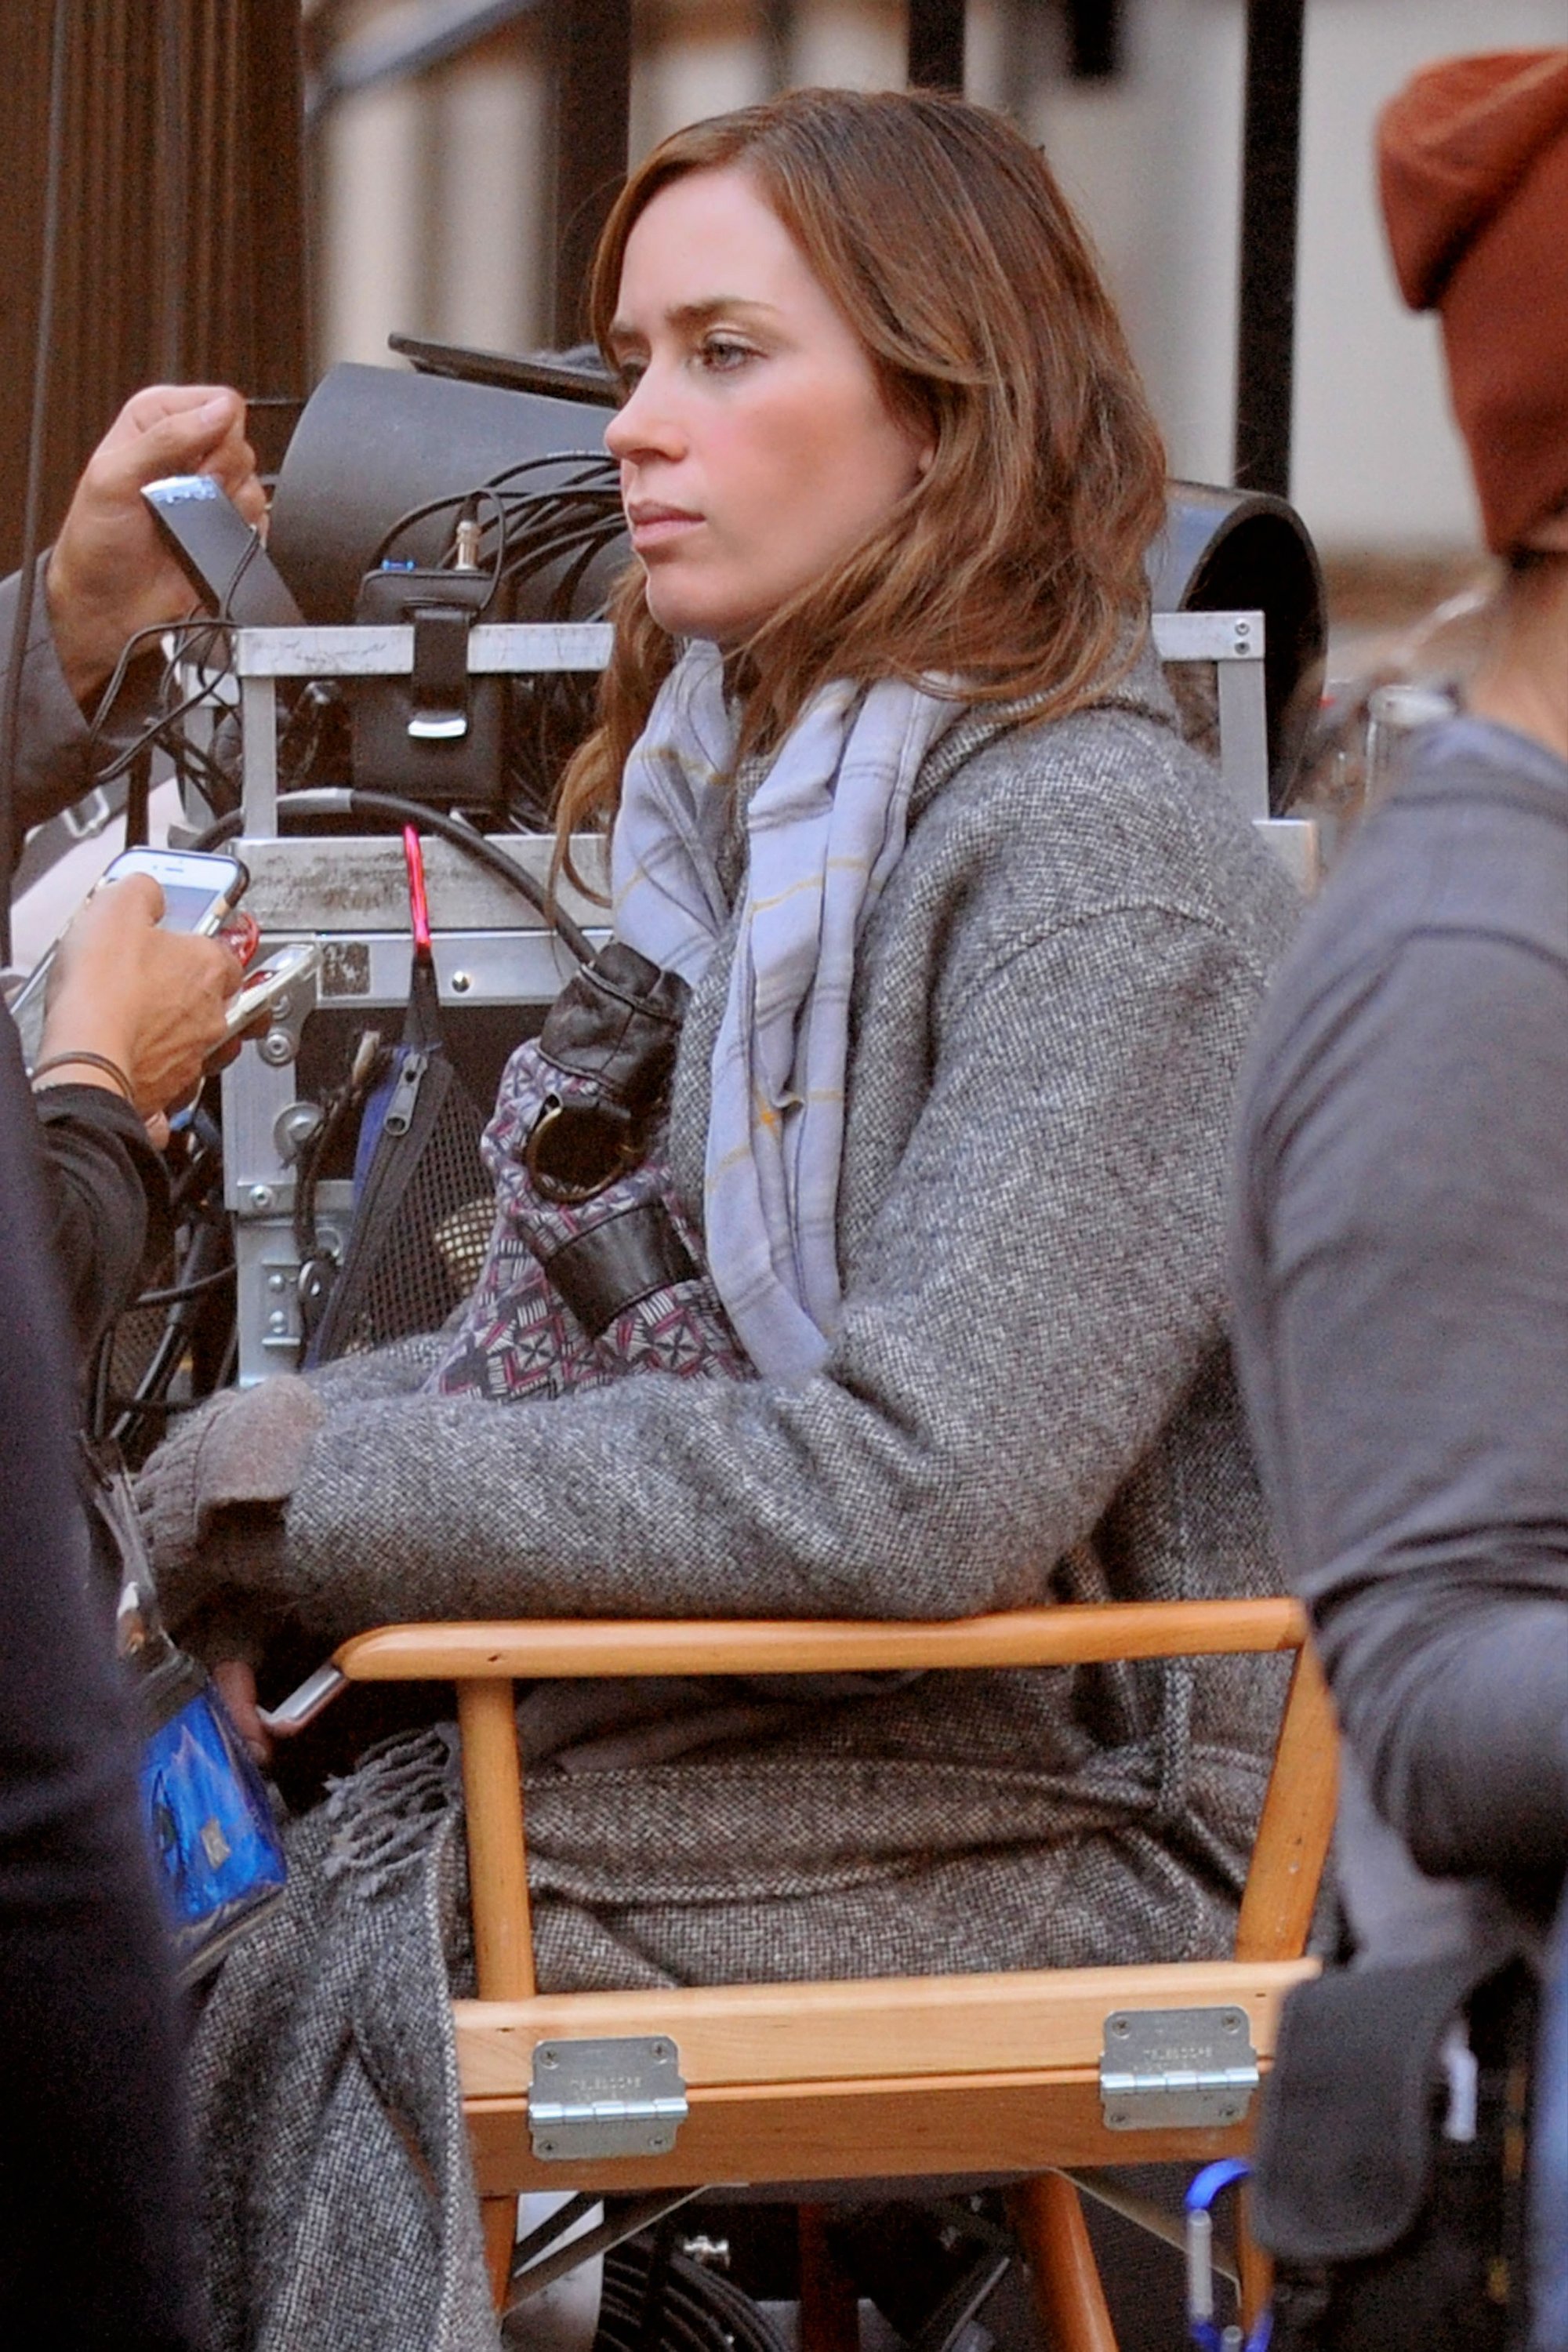 emily-blunt-the-girl-on-the-train-on-set-002.jpg